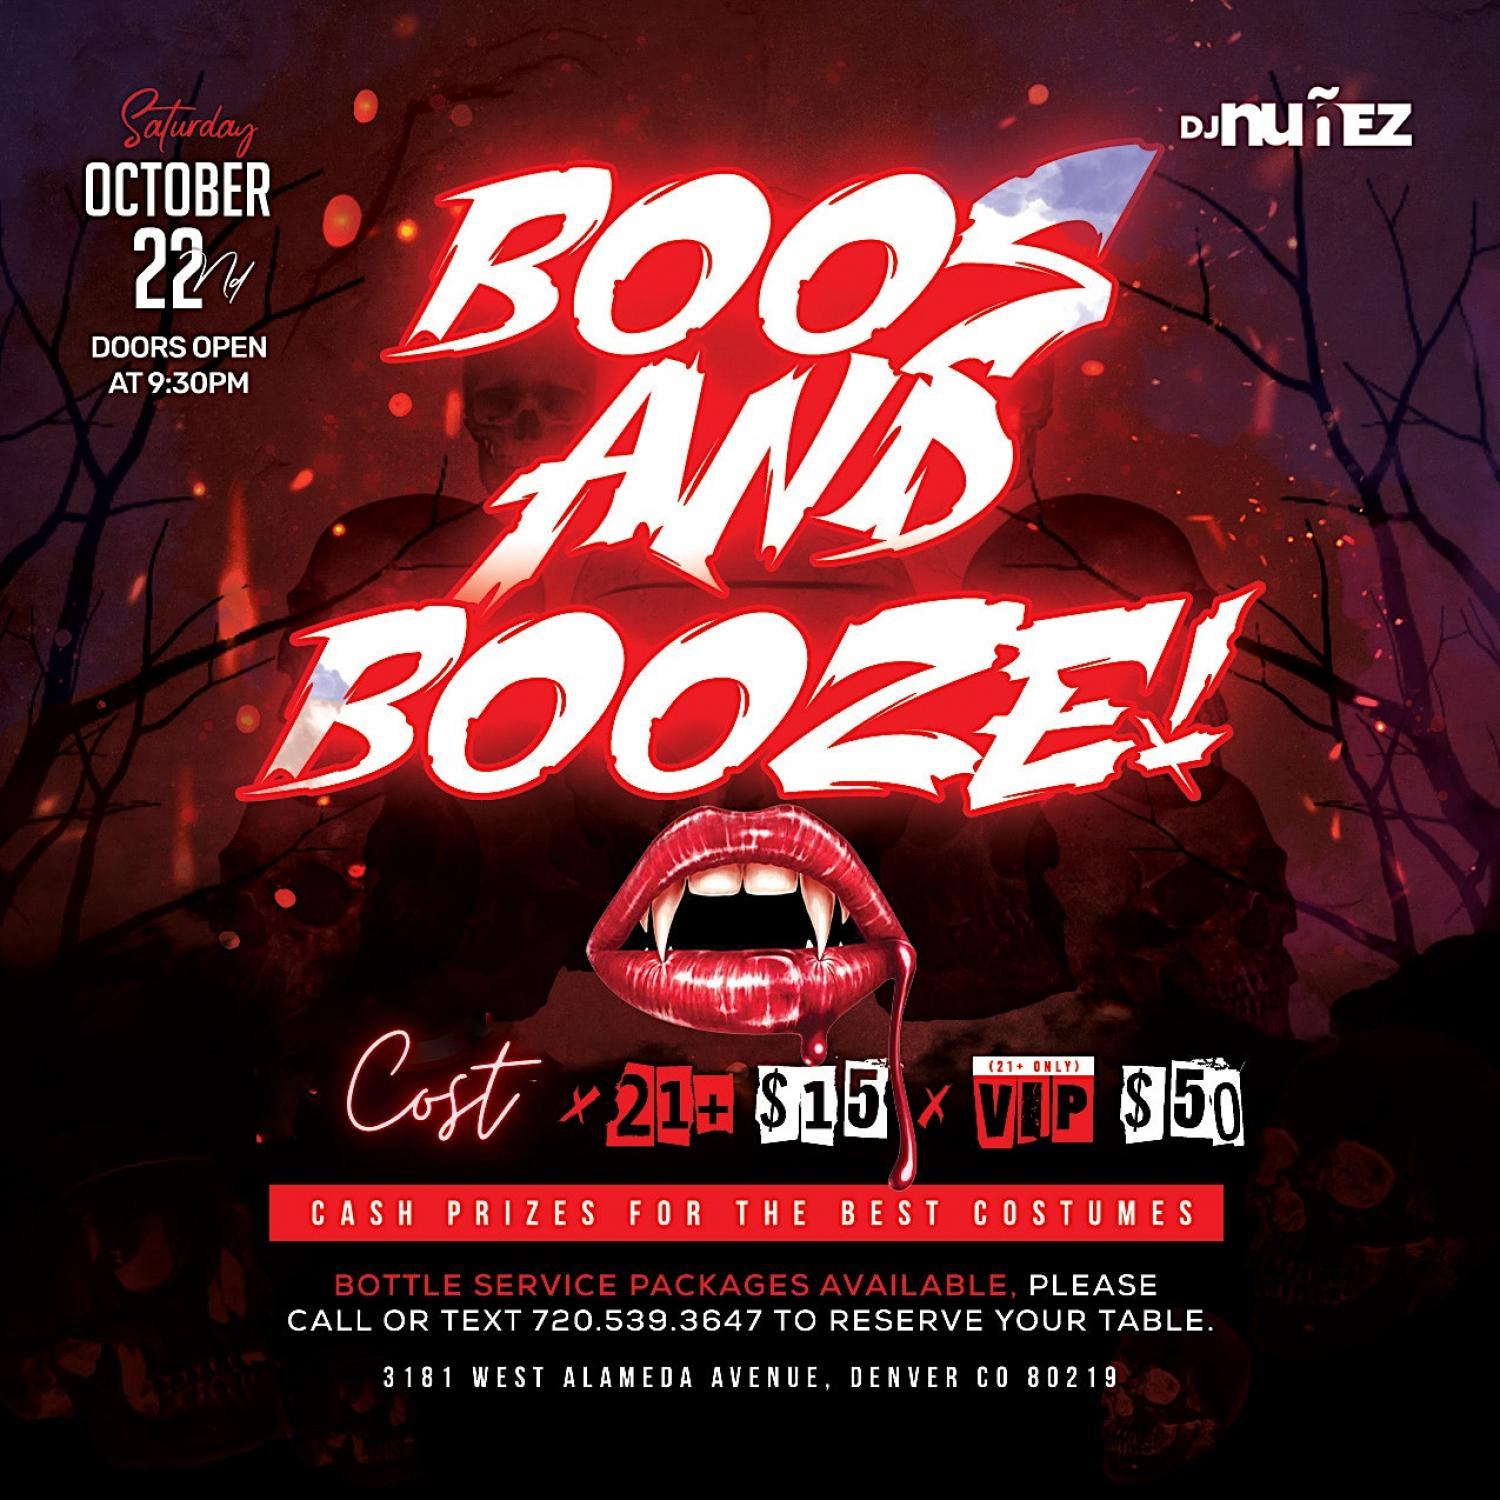 Boos and Booze: Halloween Party
Sat Oct 22, 7:00 PM - Sun Oct 23, 2:00 AM
in 3 days